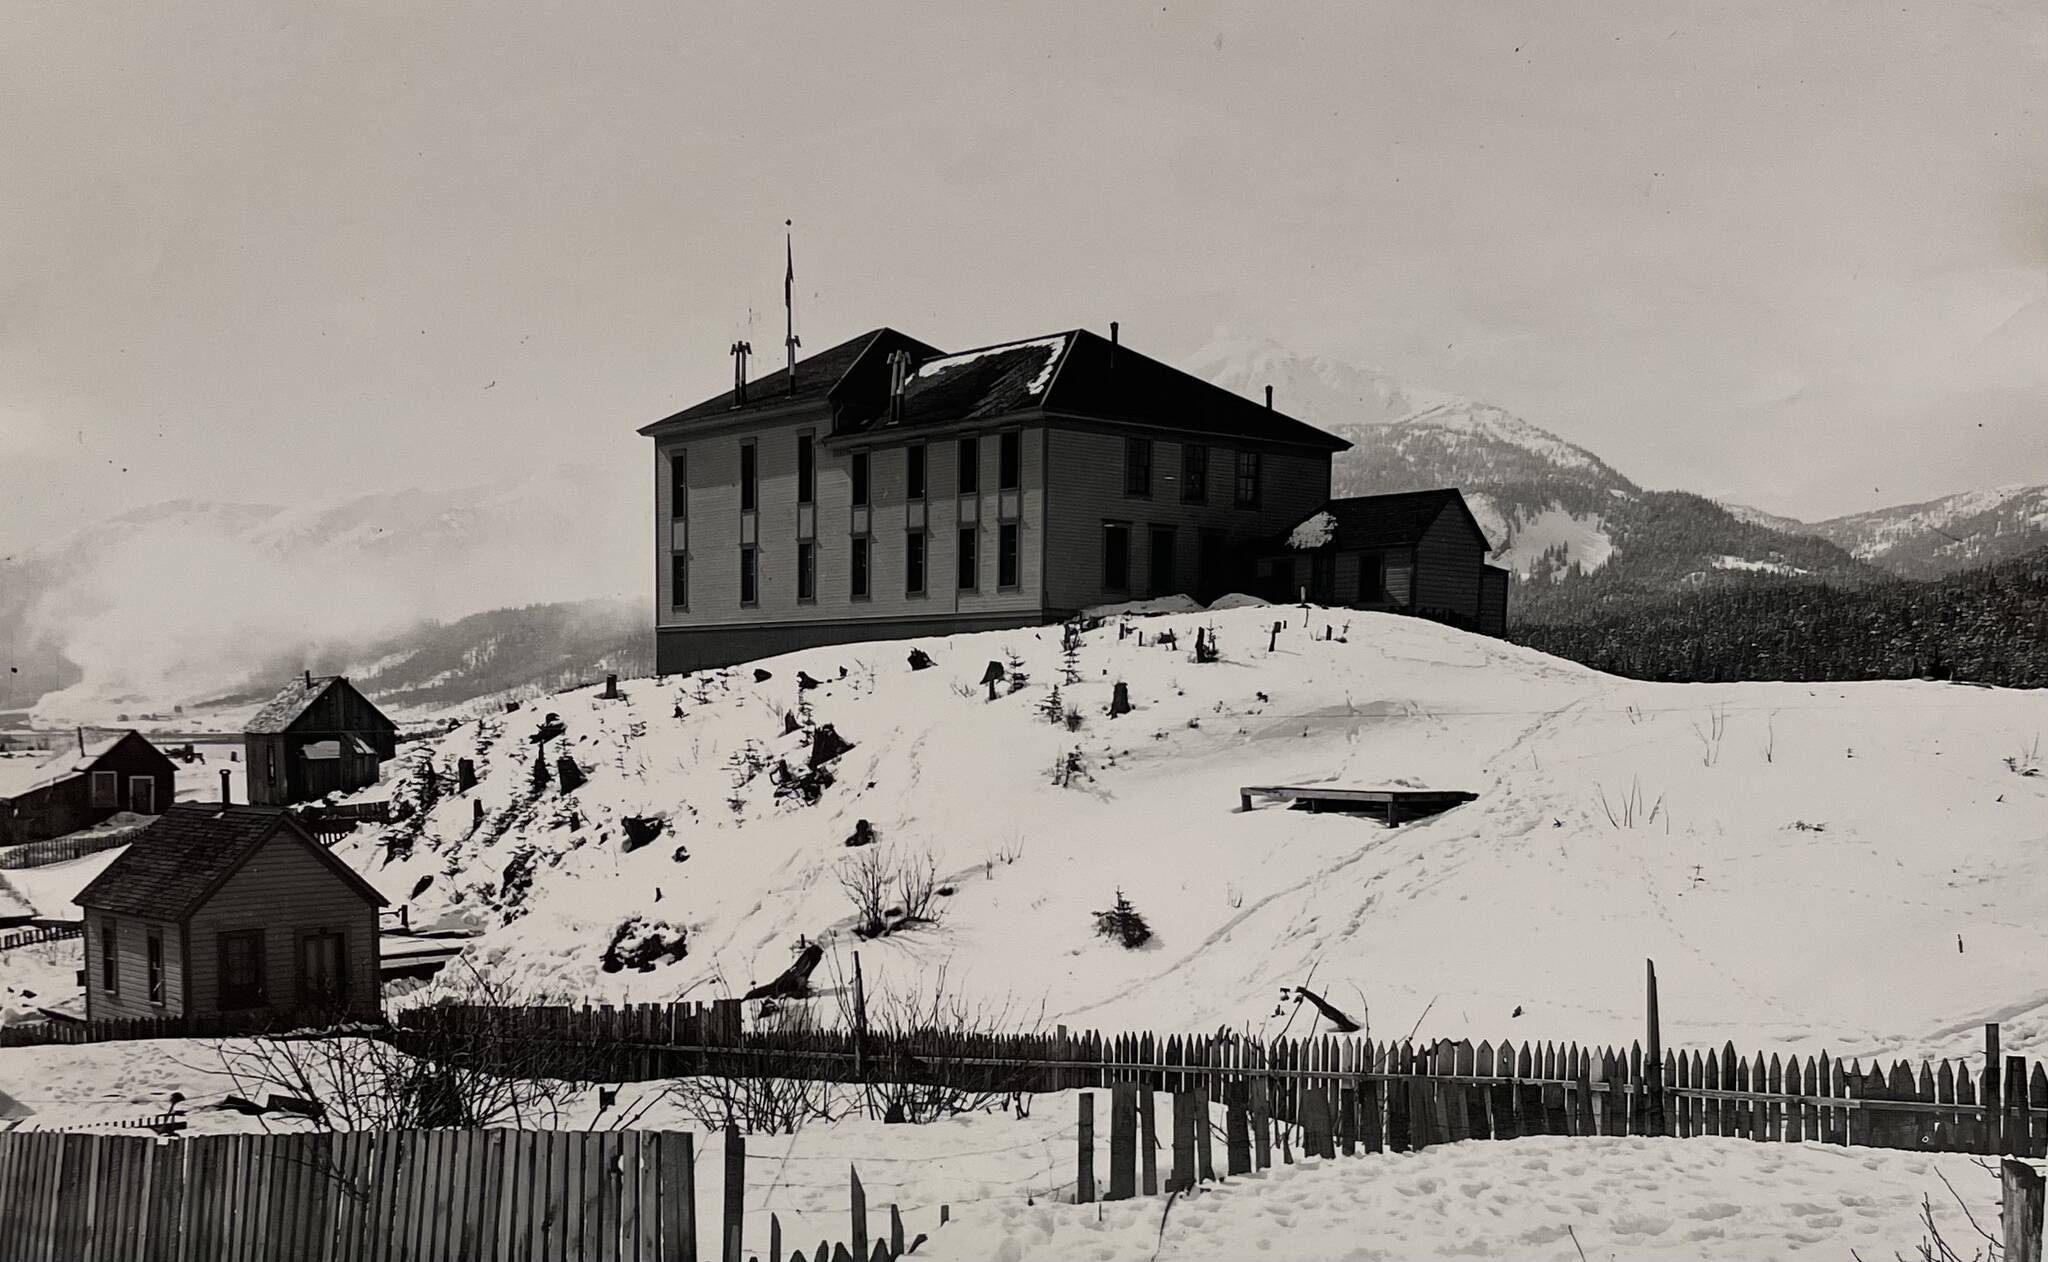 Juneau’s second courthouse was built in 1893 and burned in 1898. Its location is the site of today’s State Office Building. The town’s first courthouse was a small frame house on Franklin Street. (Alaska State Library PCA 280-01)